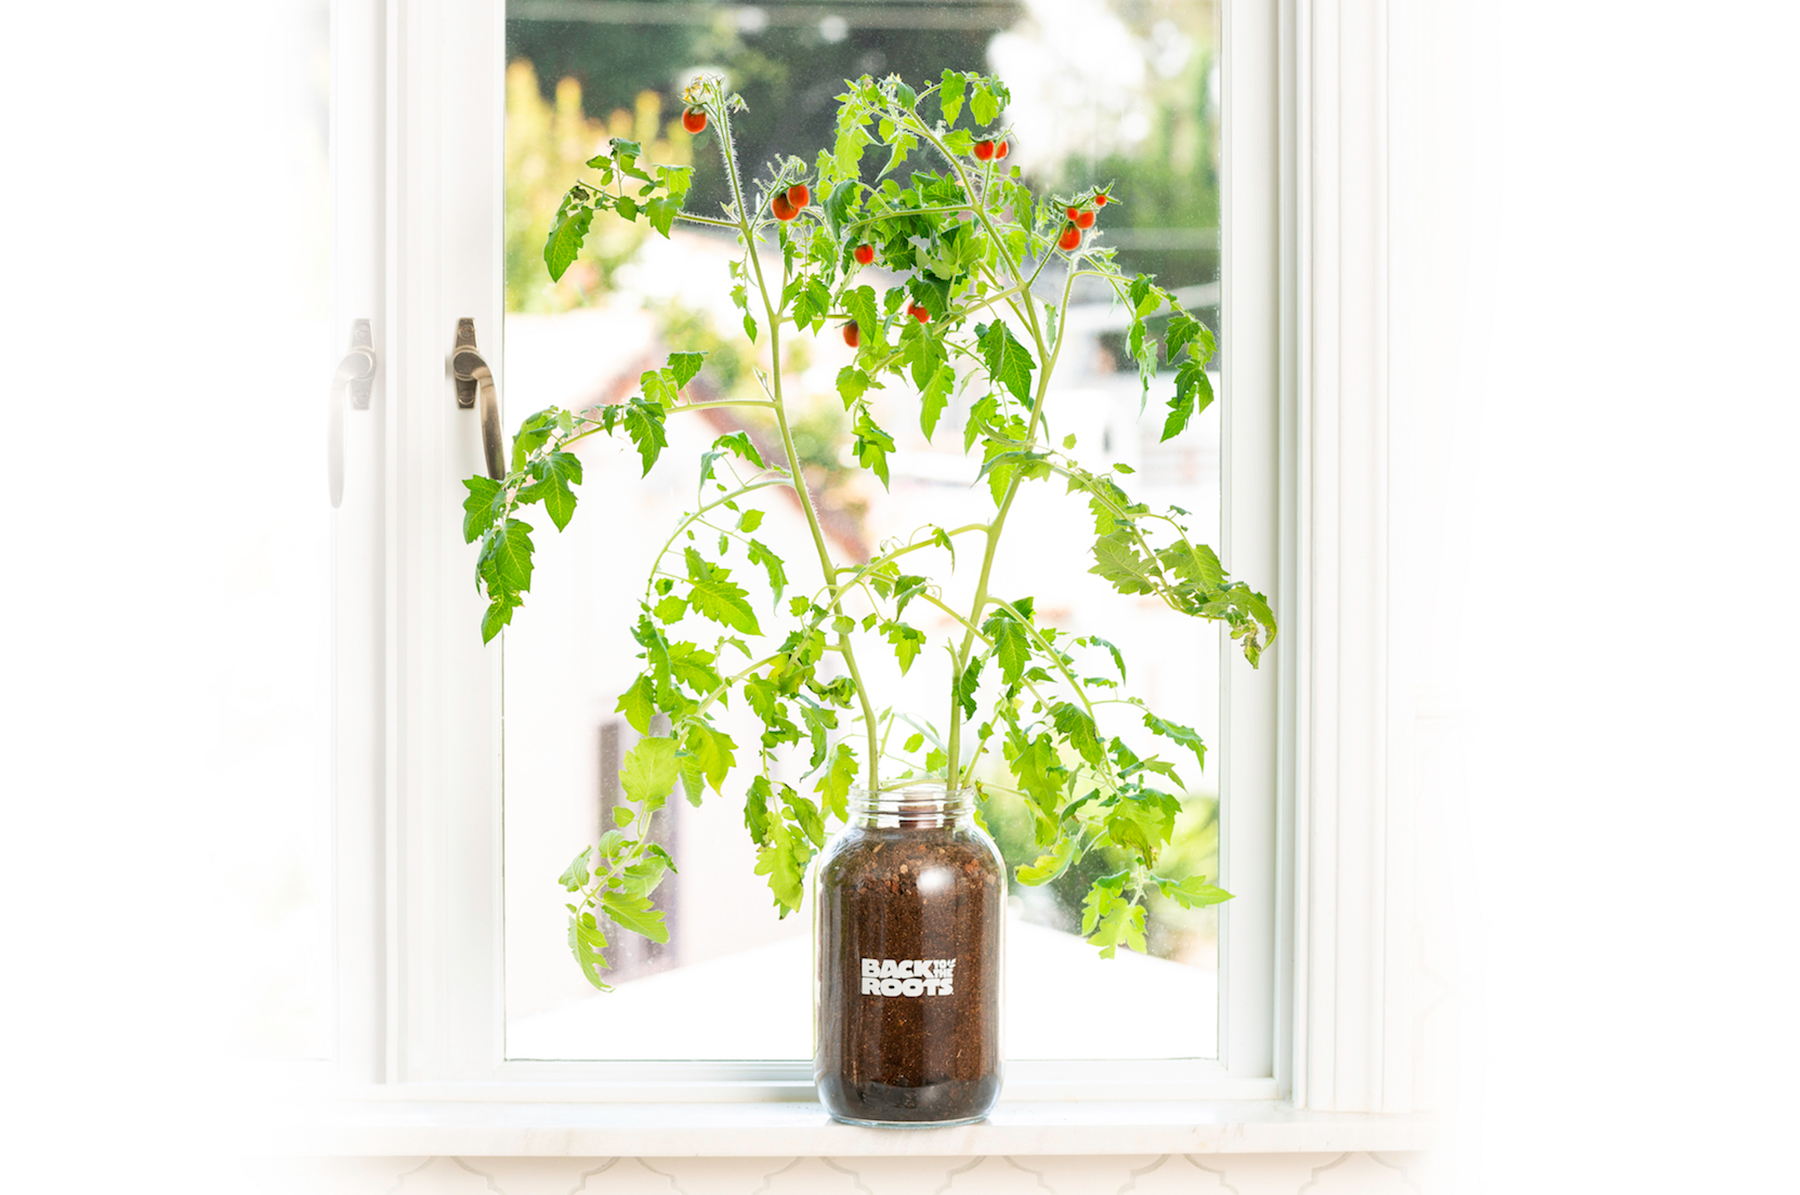 Back to the Roots Windowsill Red Cherry Tomato Planter, Grow Kit - image 4 of 10